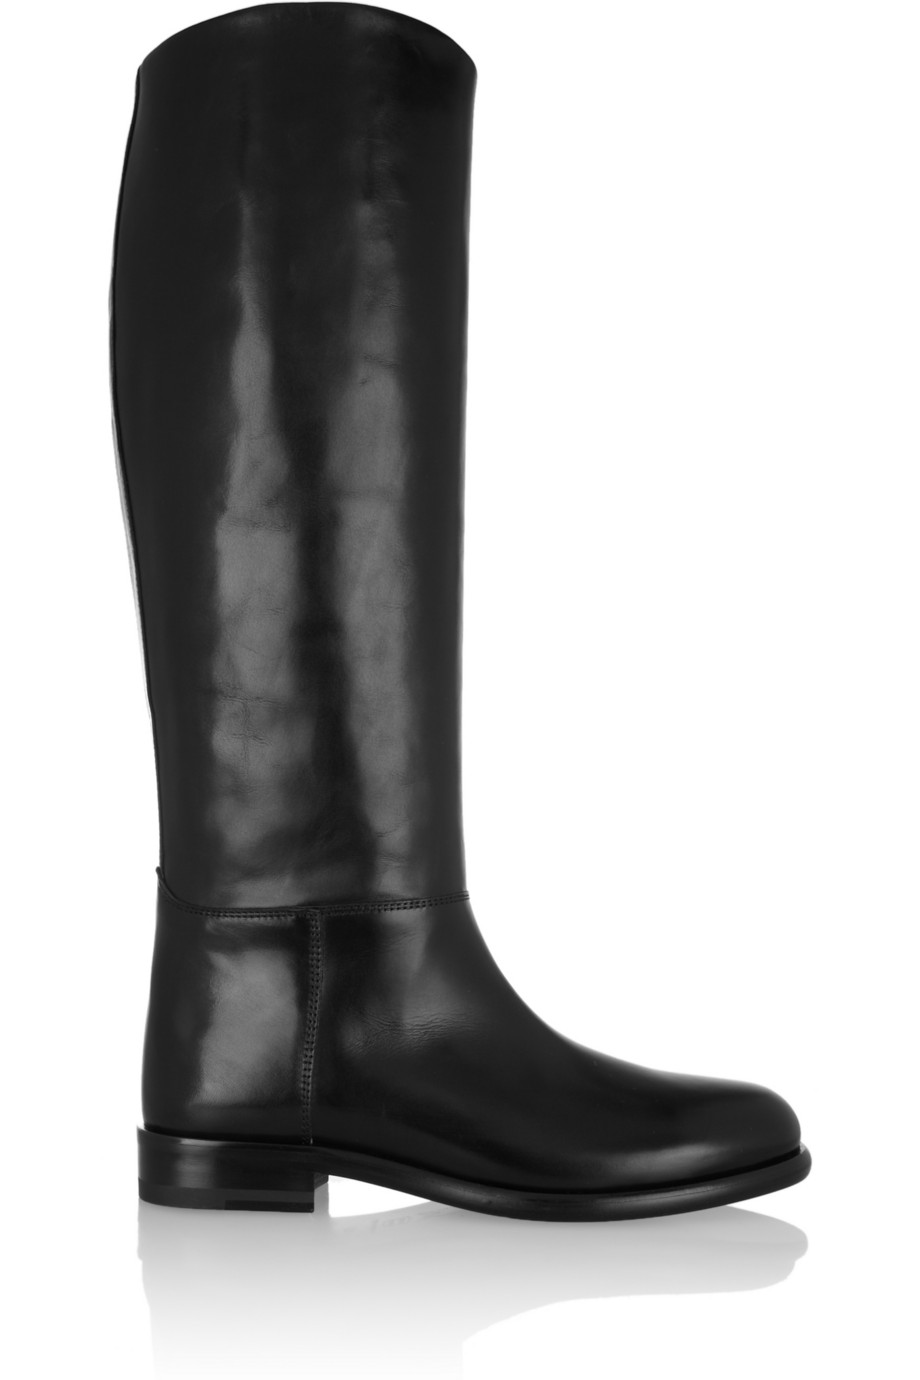 Marni Leather Knee Boots in Black - Lyst